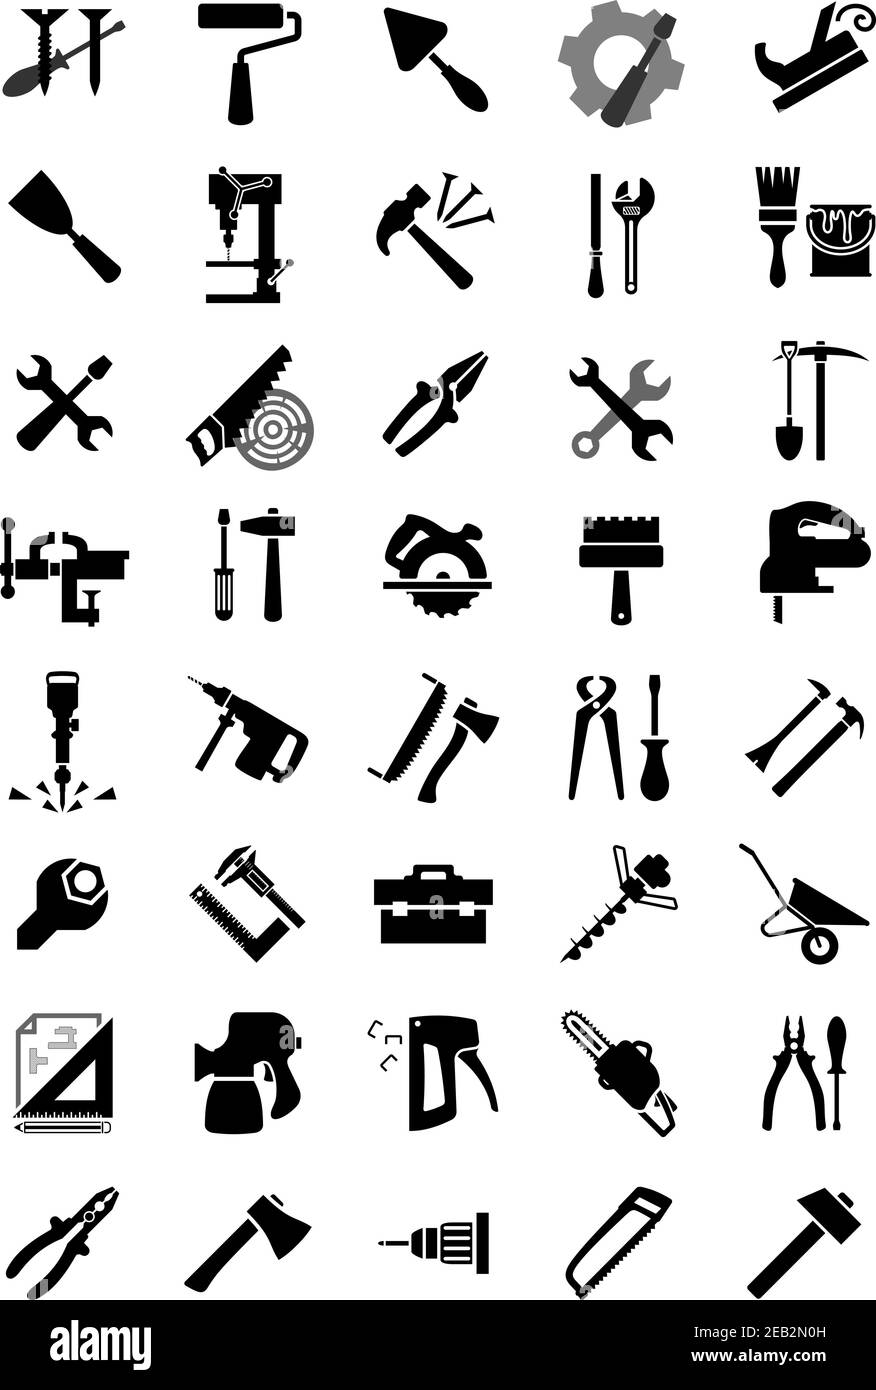 Black icons of screwdrivers and hammers, wrenches and pliers, saws, axes and drills and brush, roll and shovel, toolbox and jack plane, trowel and spa Stock Vector